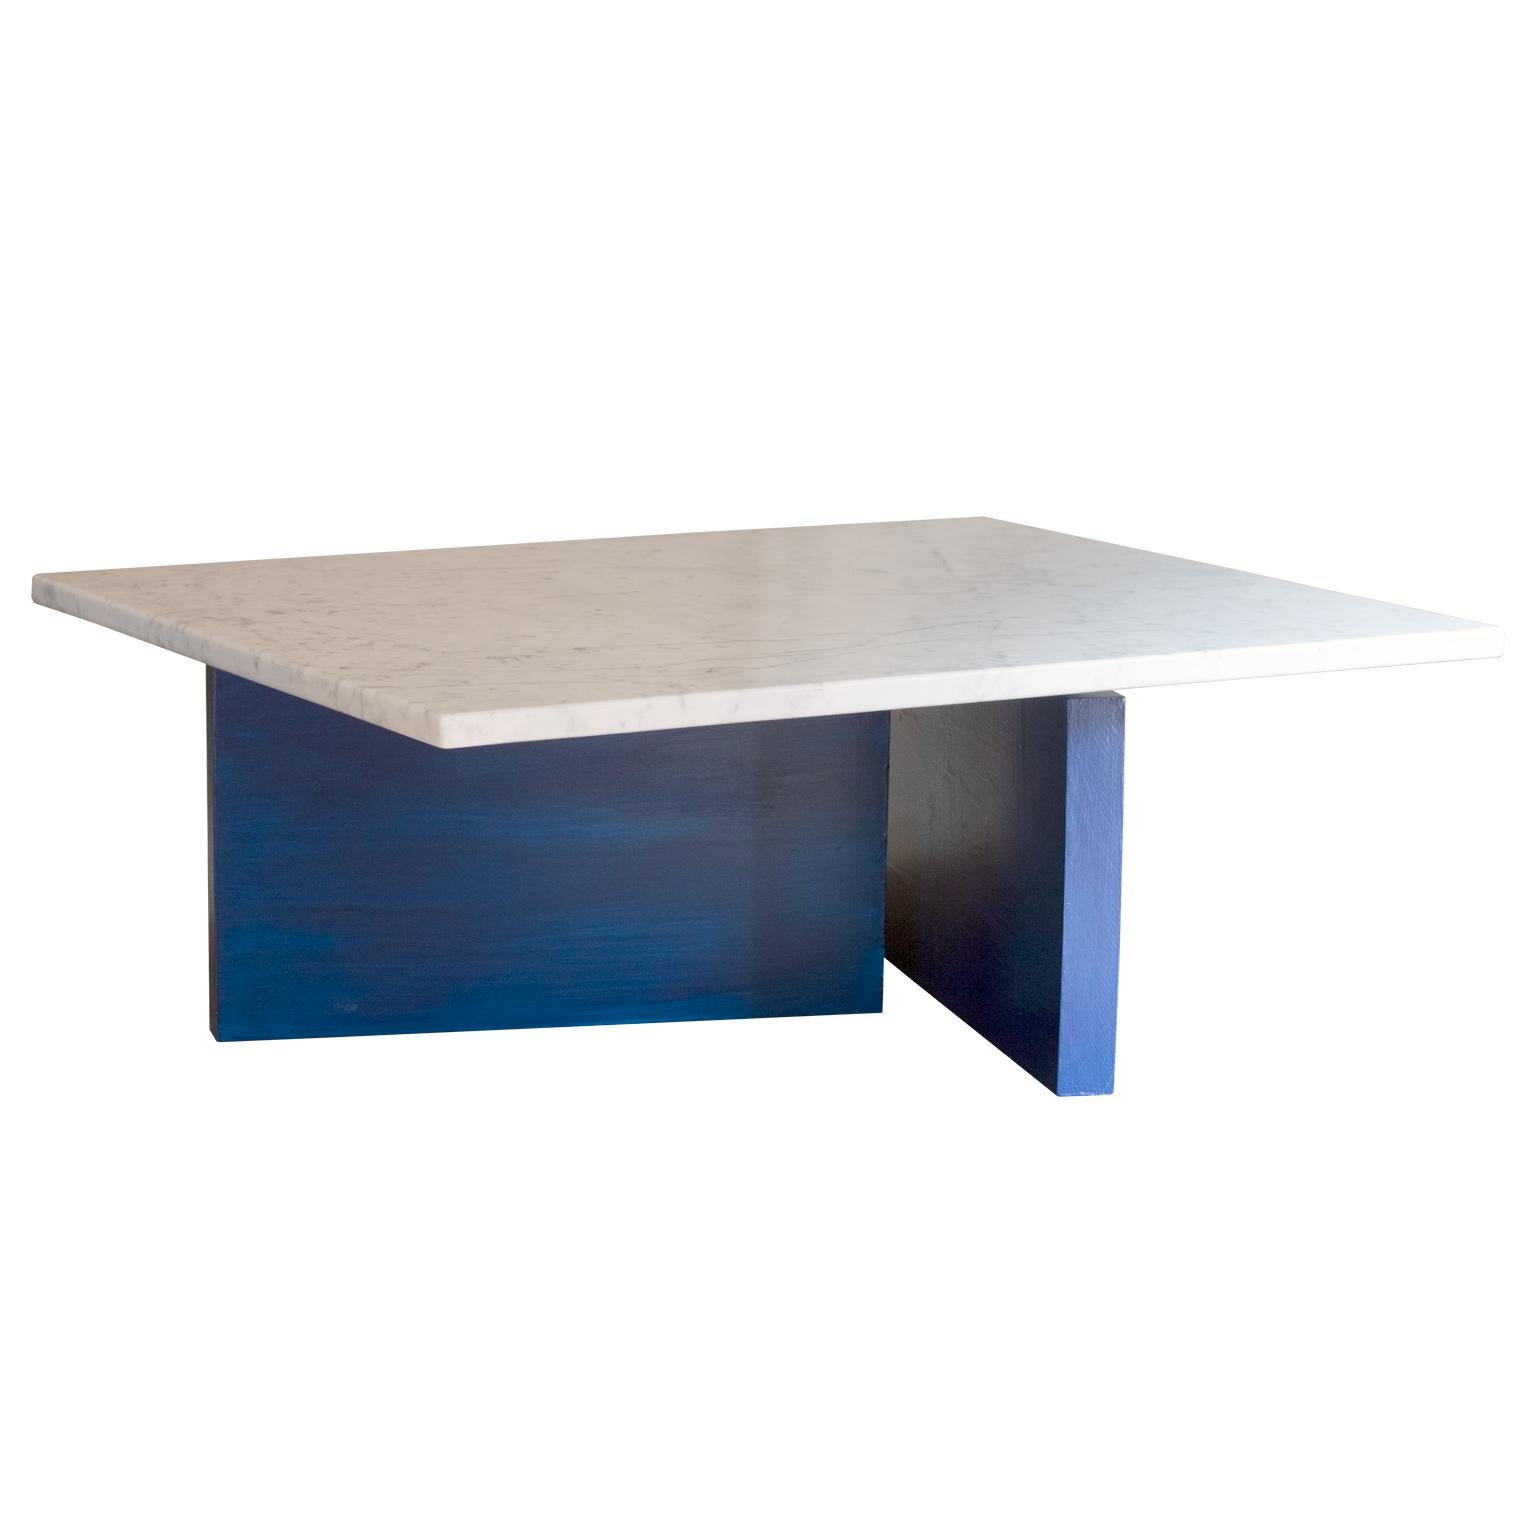 A beautiful, minimal coffee table inspired by Bauhaus architecture and art. 
This piece features a honed Carrara marble top on a solid maple wood base finished in lacquer. 

Customizable marble and lacquer finishes are available. 
Customizable